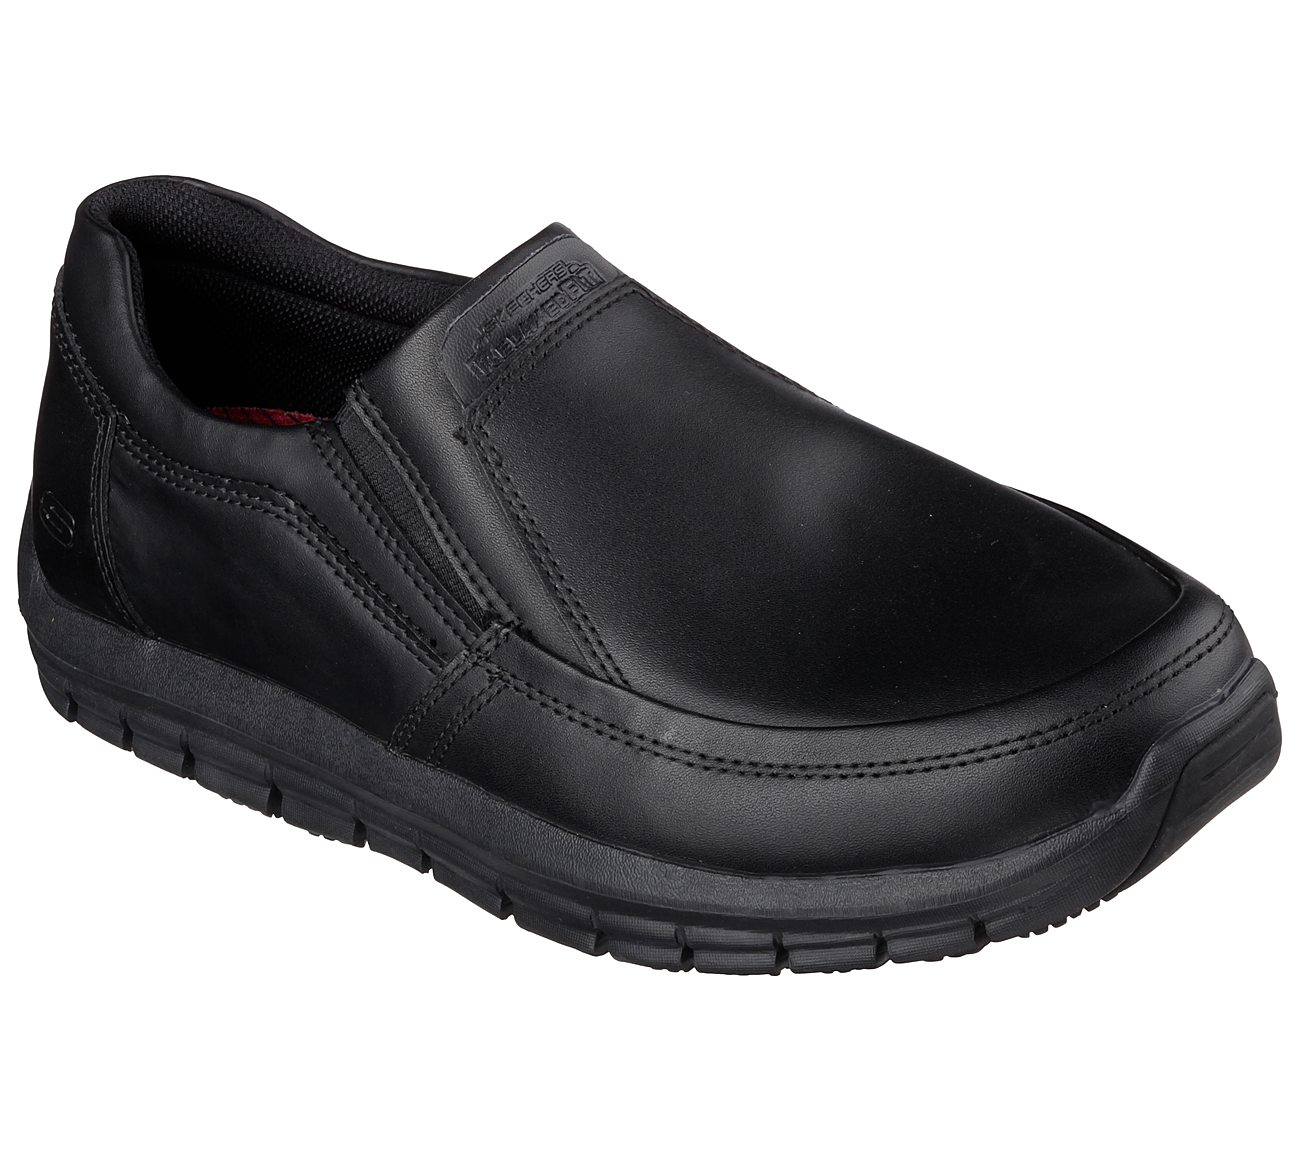 rubber safety shoes